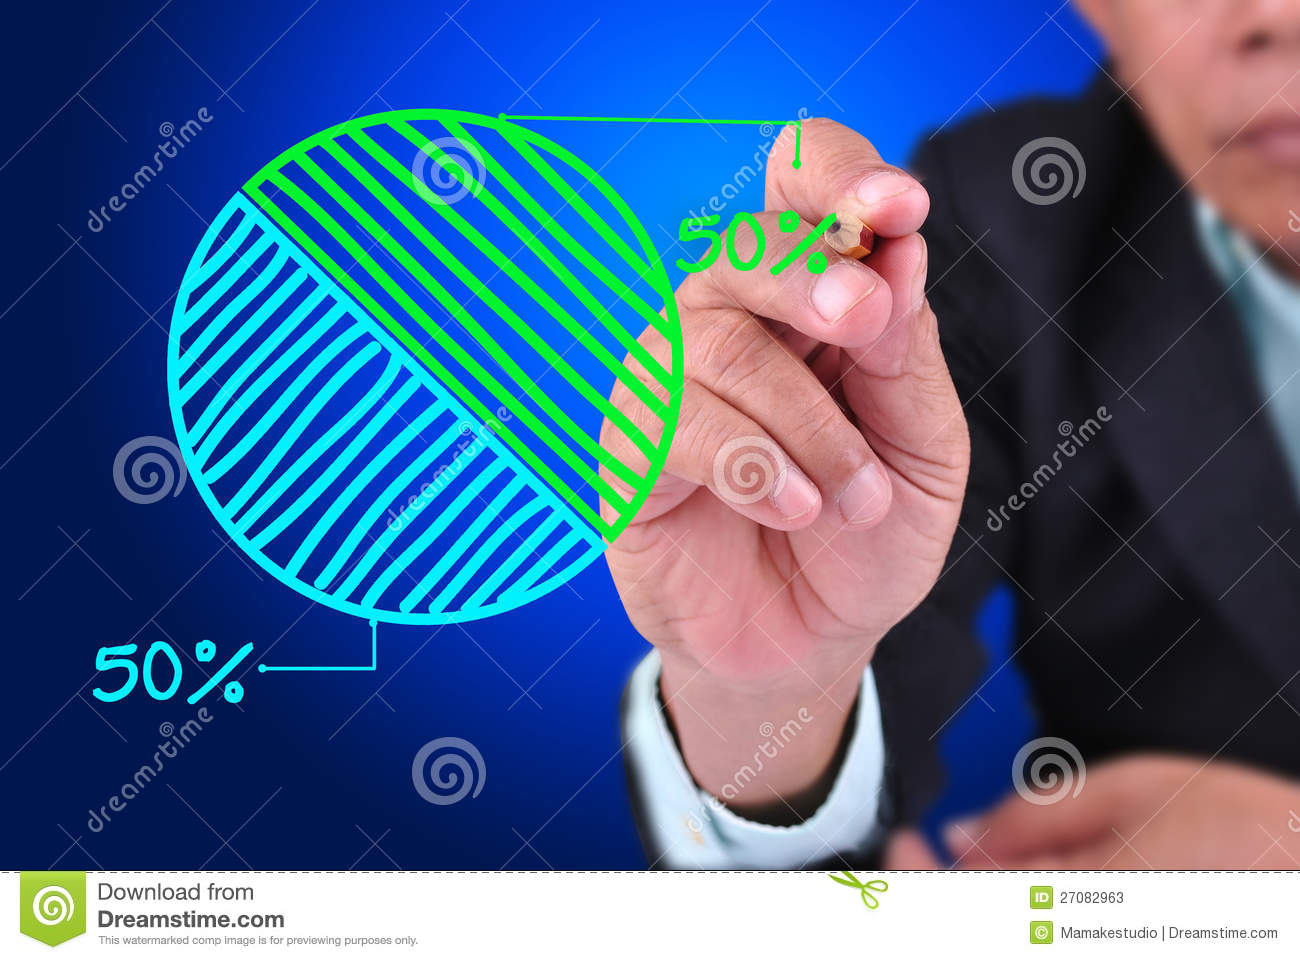 Man Drawing 50   50 Percent Pie Chart  With Green   Blue Pie Chart